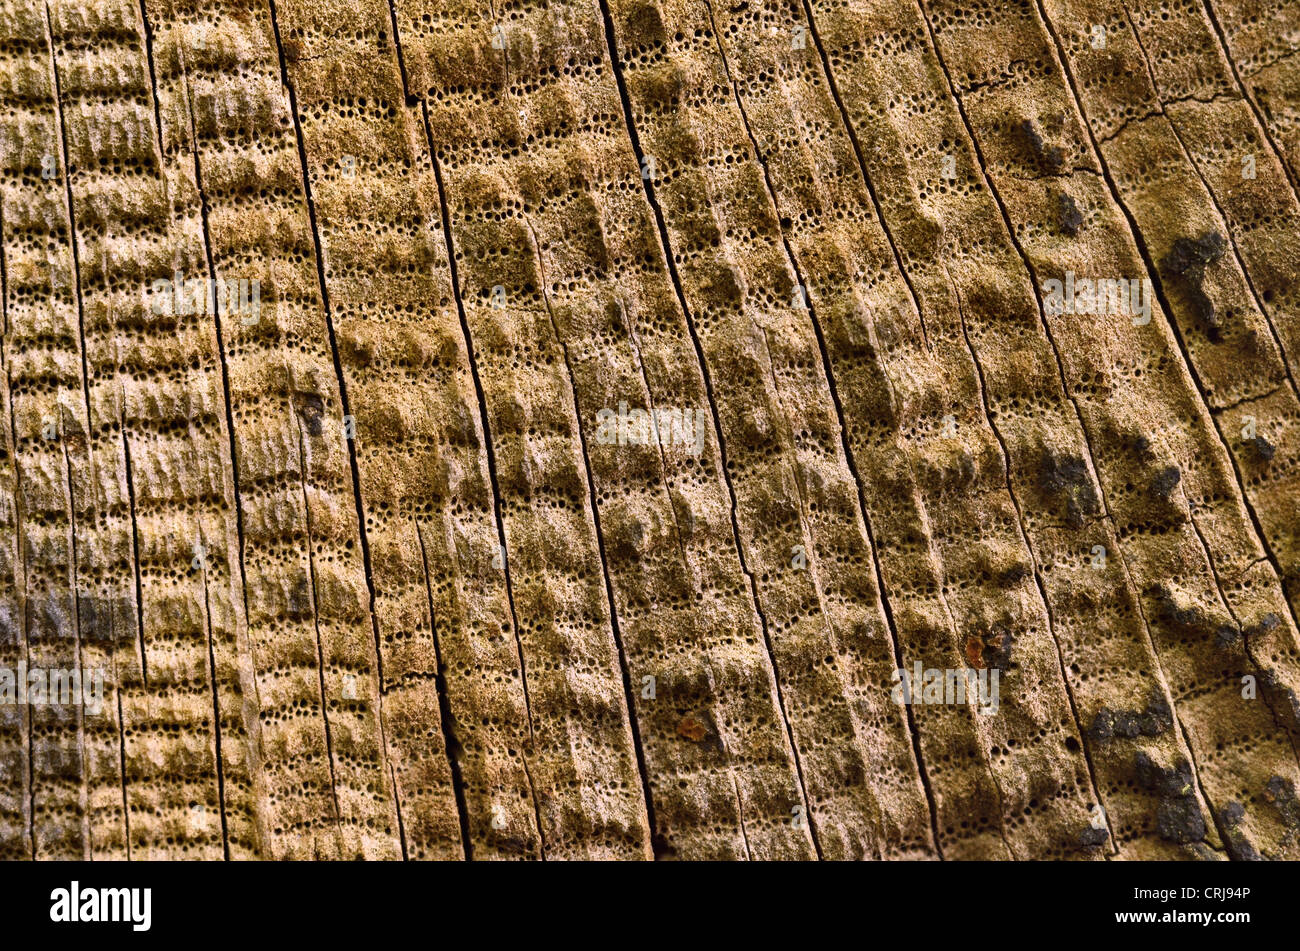 Close detail of weathered tree trunk, showing radial arrangement of decayed xylem / phloem channels, medullary rays, shapes in nature, tree trunk ring Stock Photo